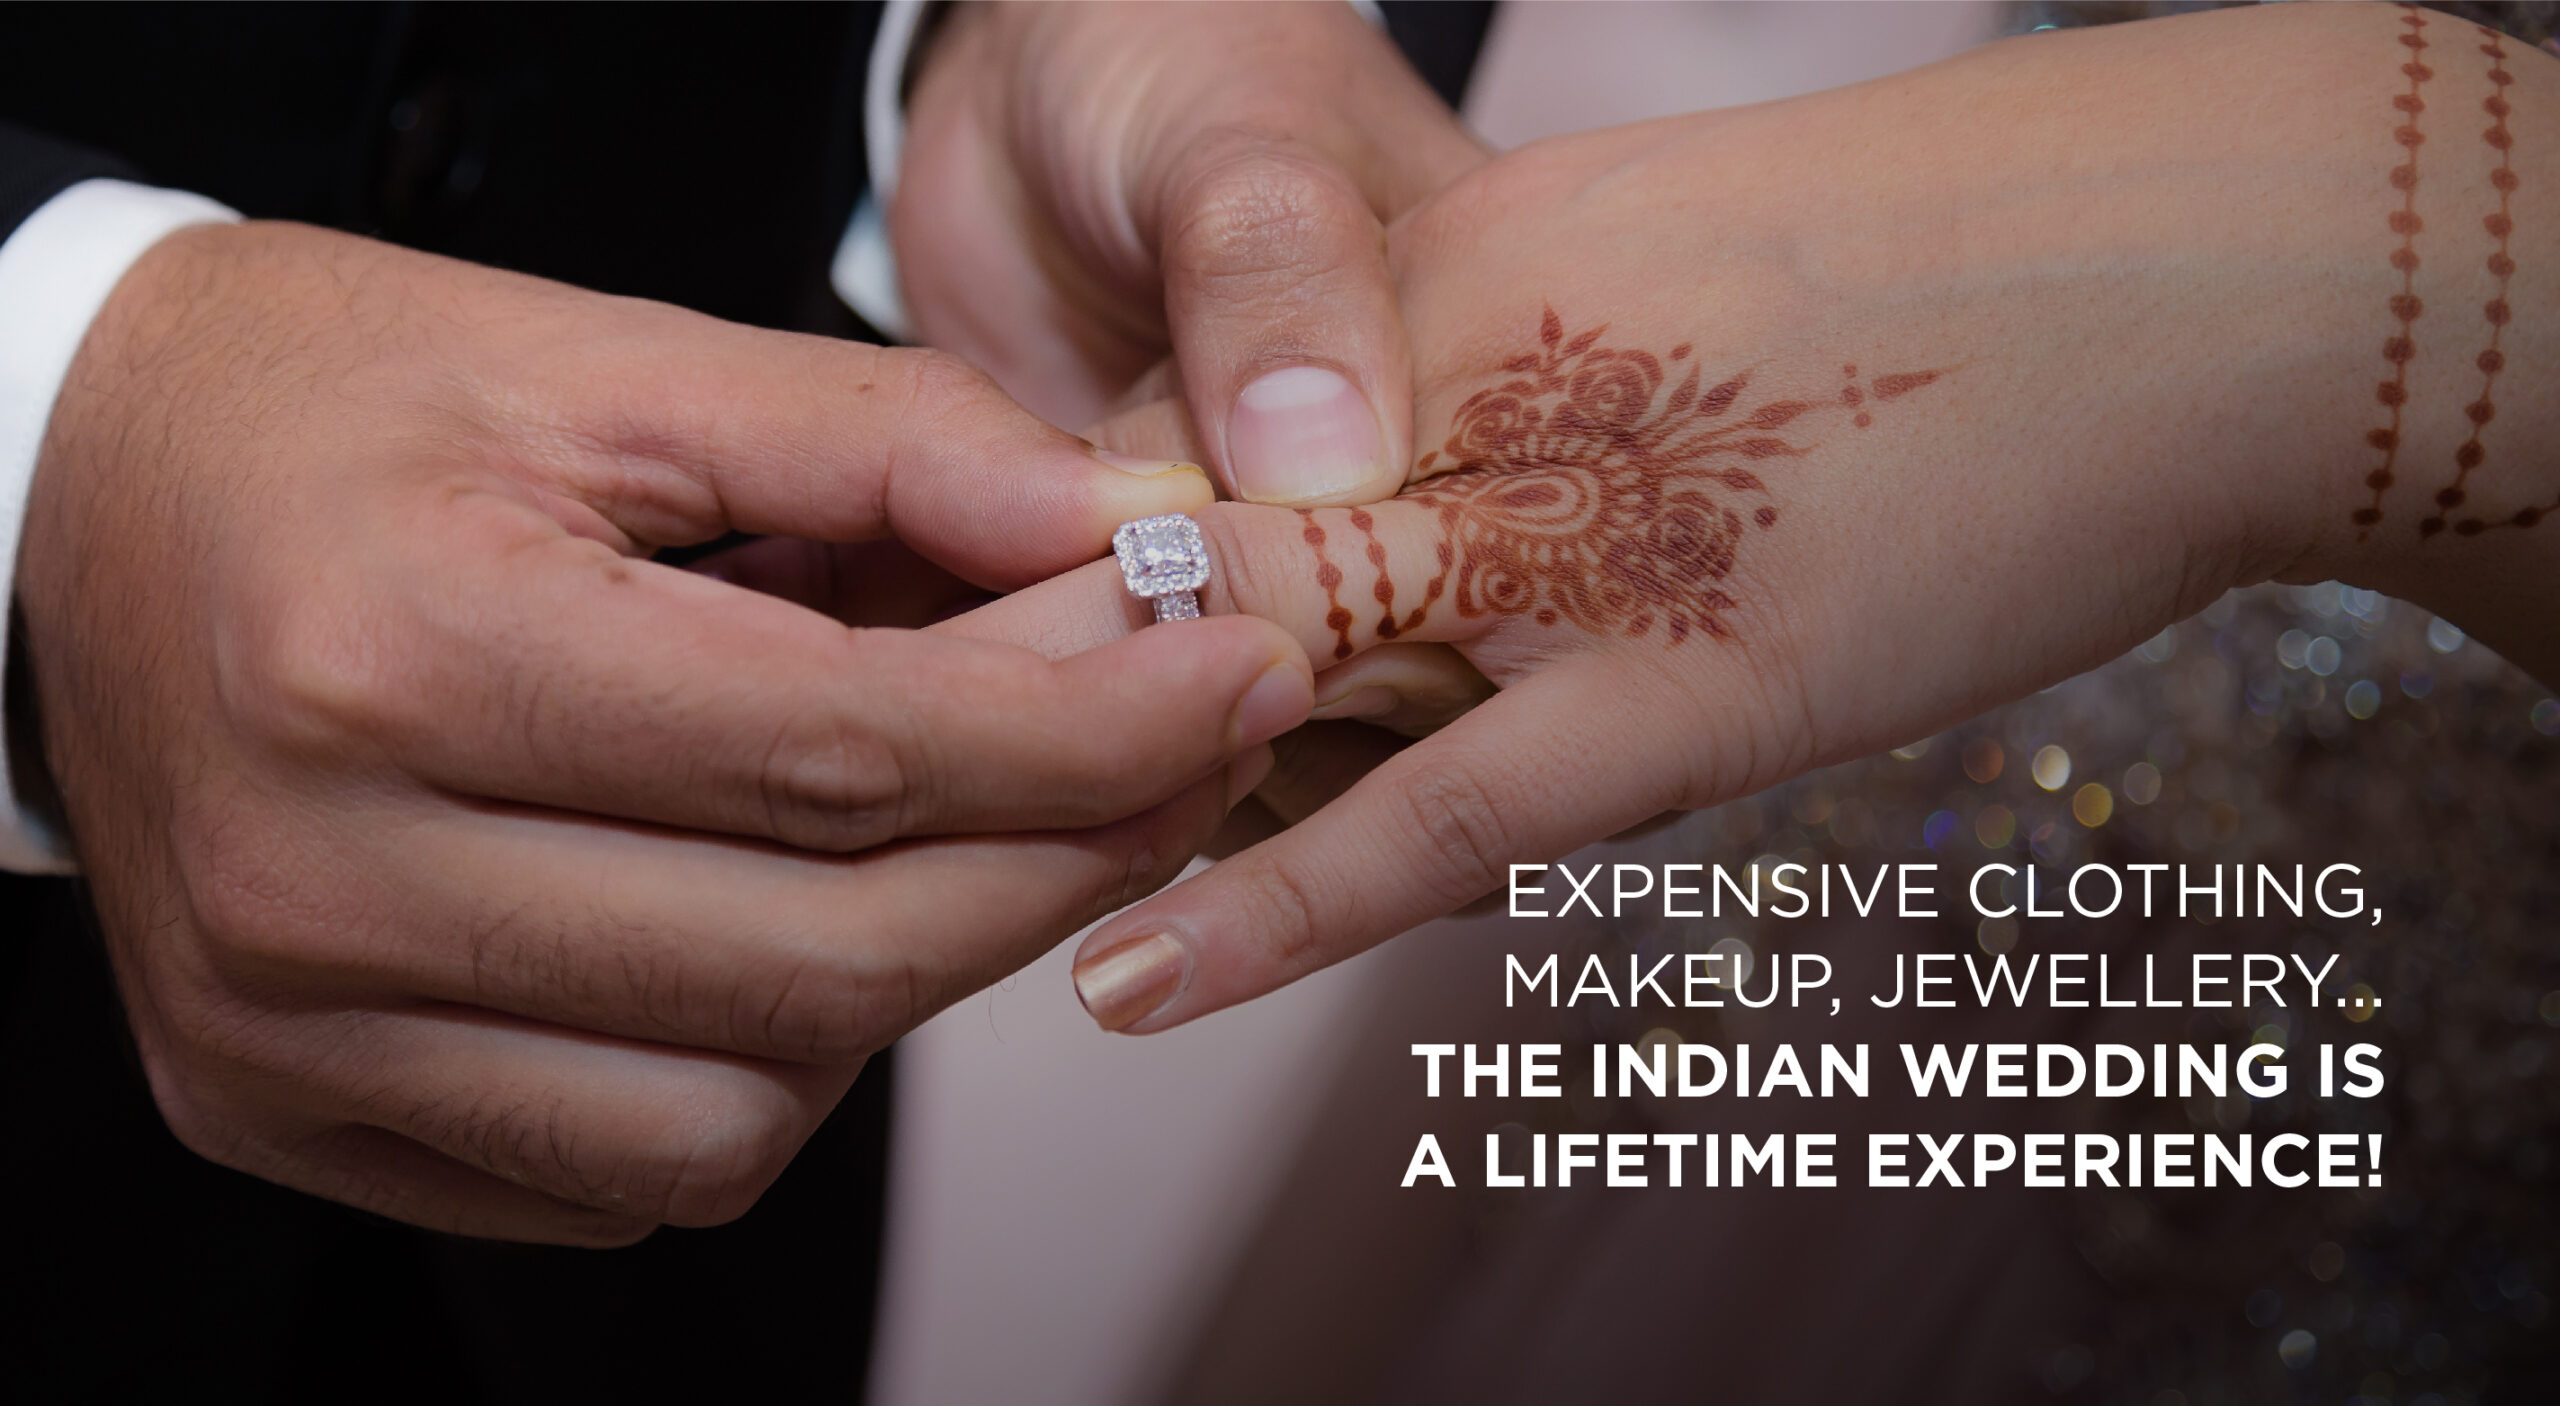 Expensive clothing, makeup, jewellery… the Indian wedding is a lifetime experience!